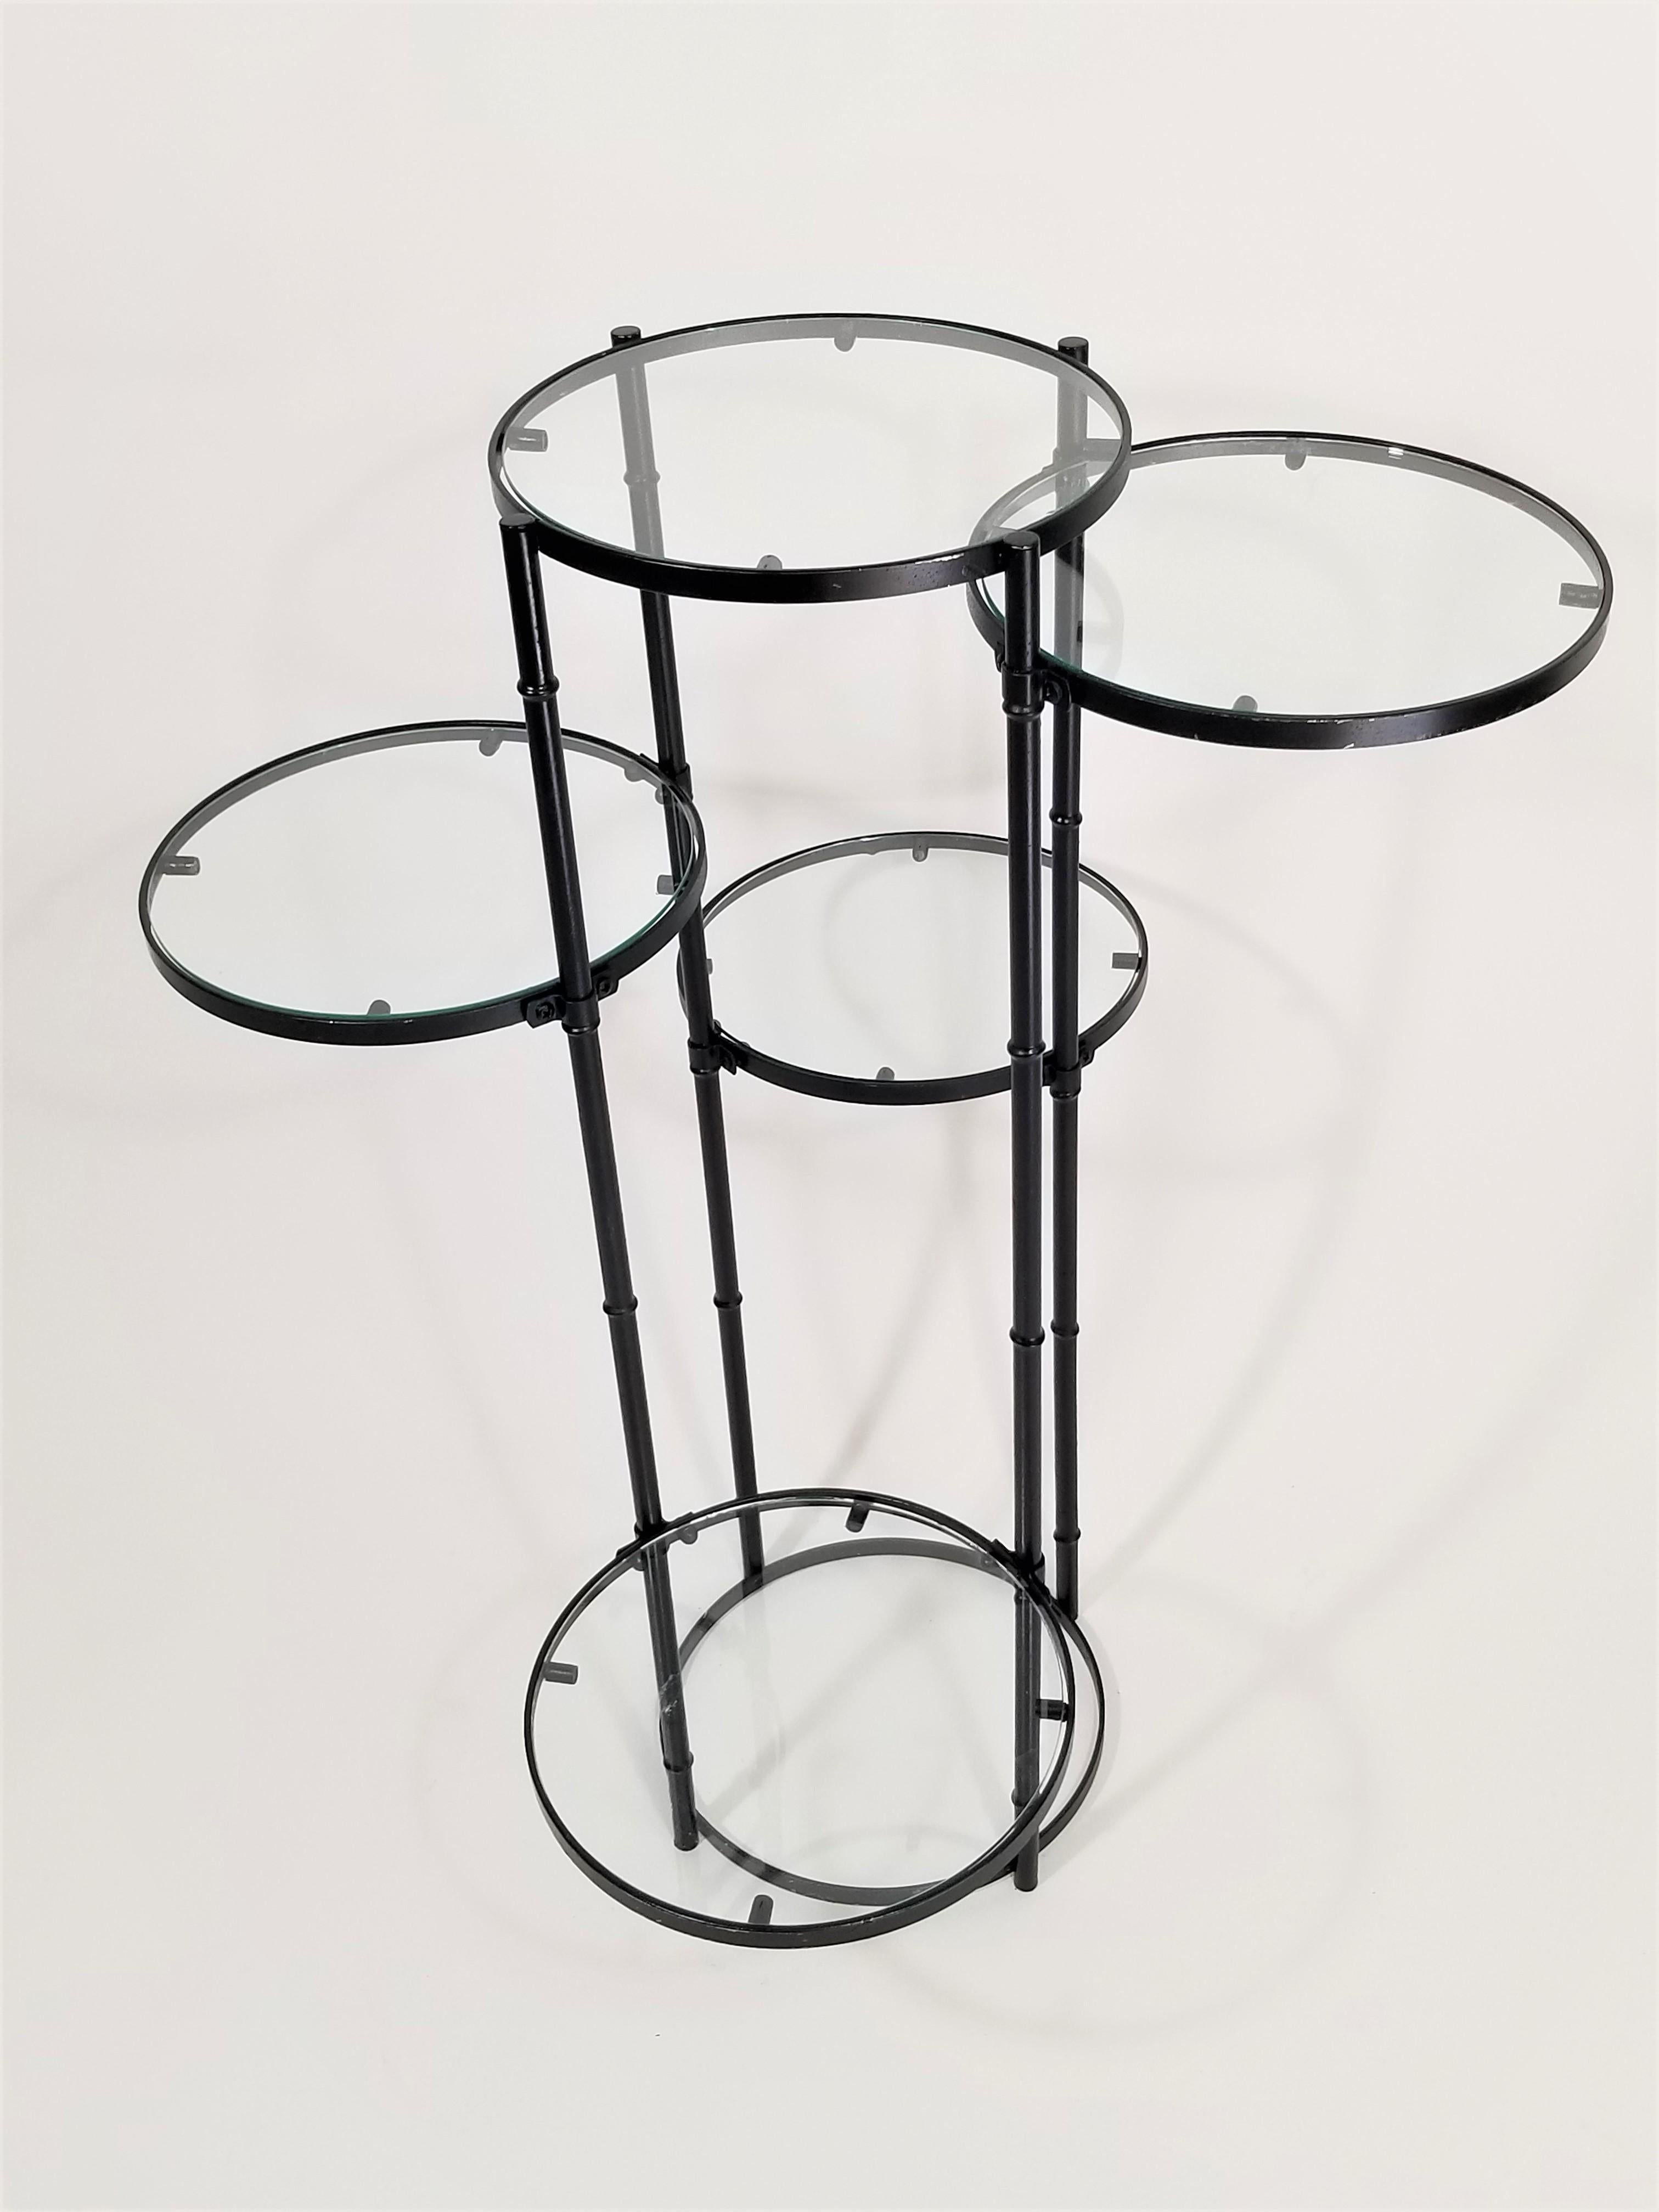 Vintage Art Deco to midcentury era plant or patio stand. 5-tiered. Black wrought iron and round glass shelves or tiers.